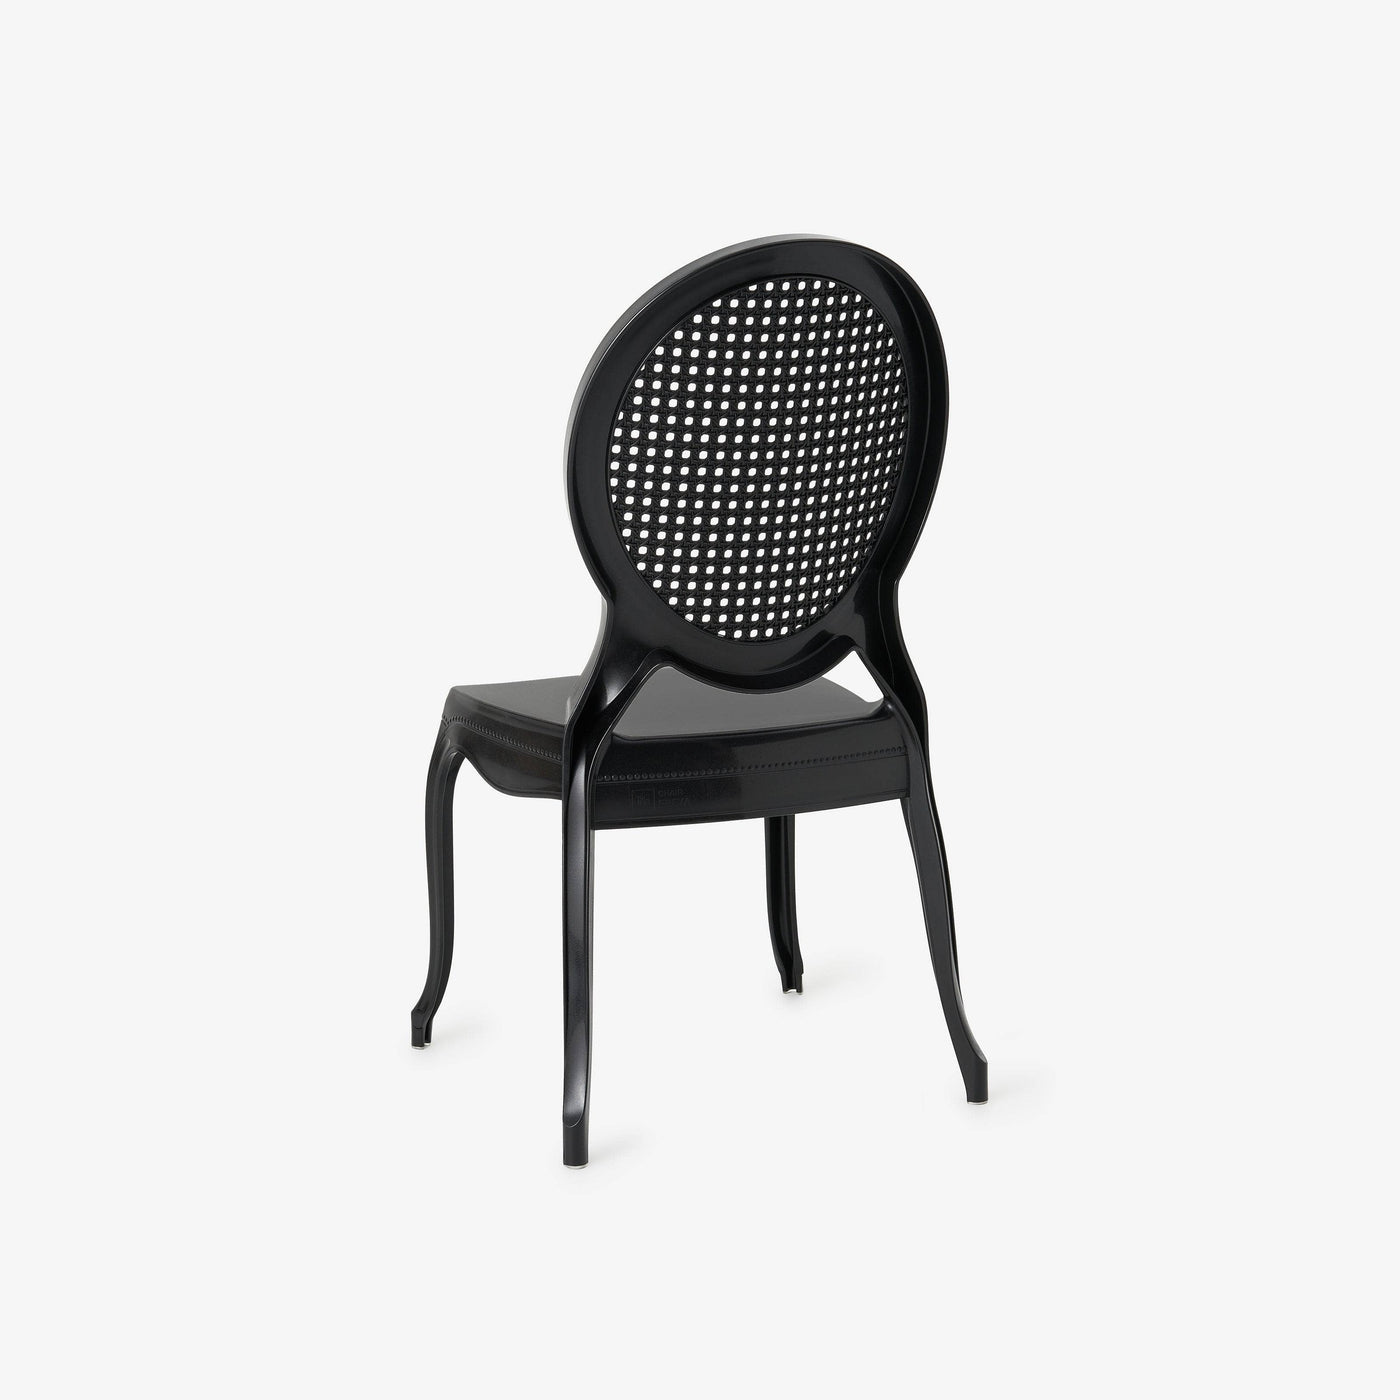 Barco Set of 4 Chairs, Black - 4